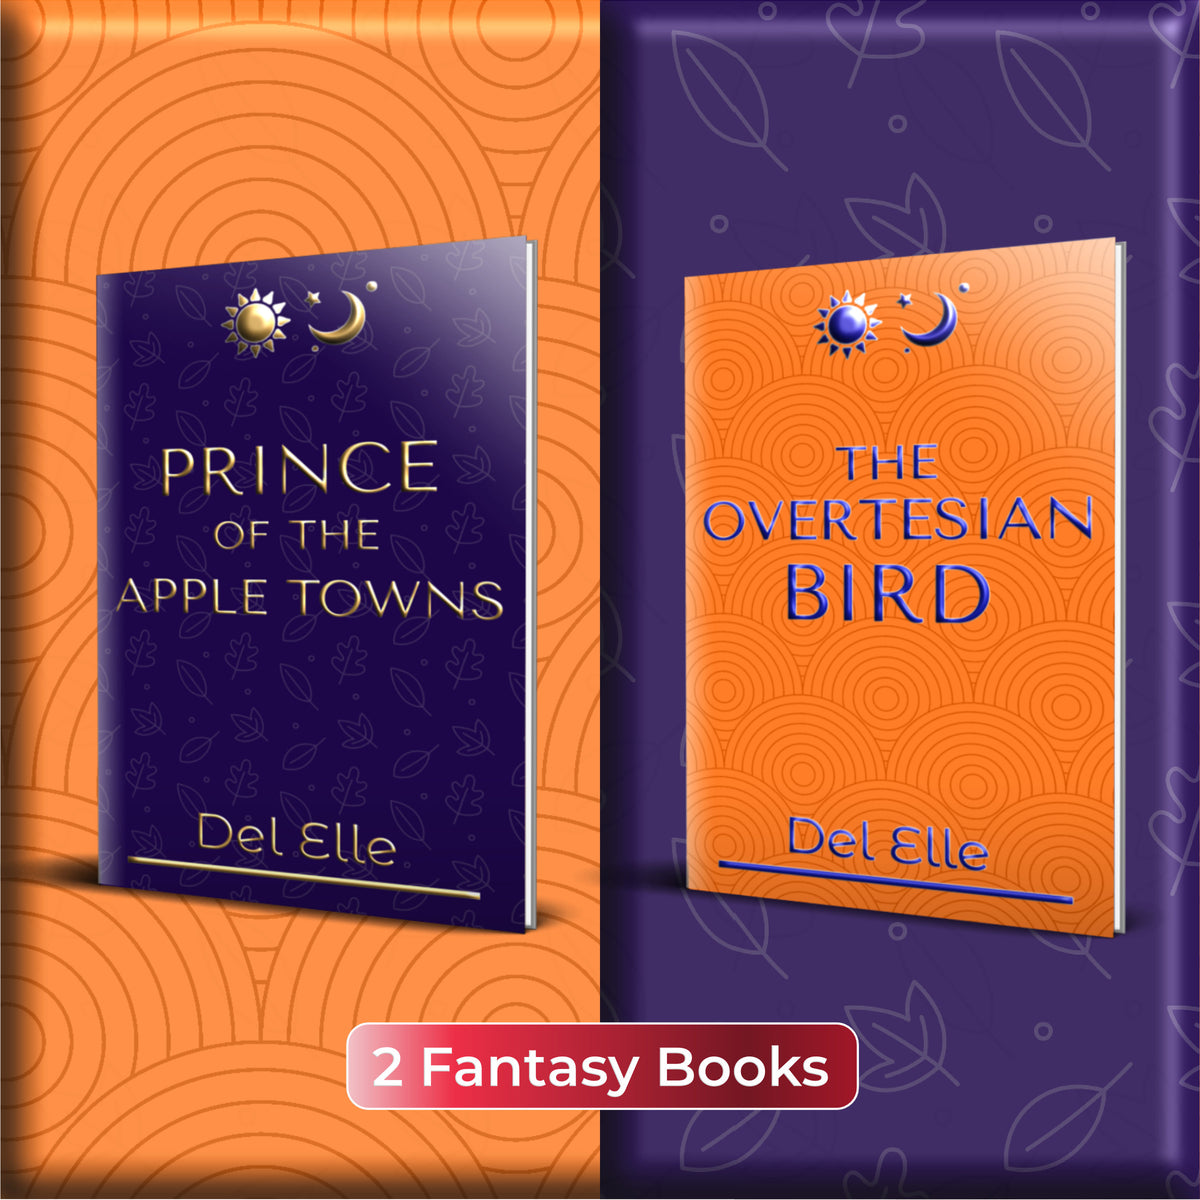 How about two books of a fantasy series set on a high street